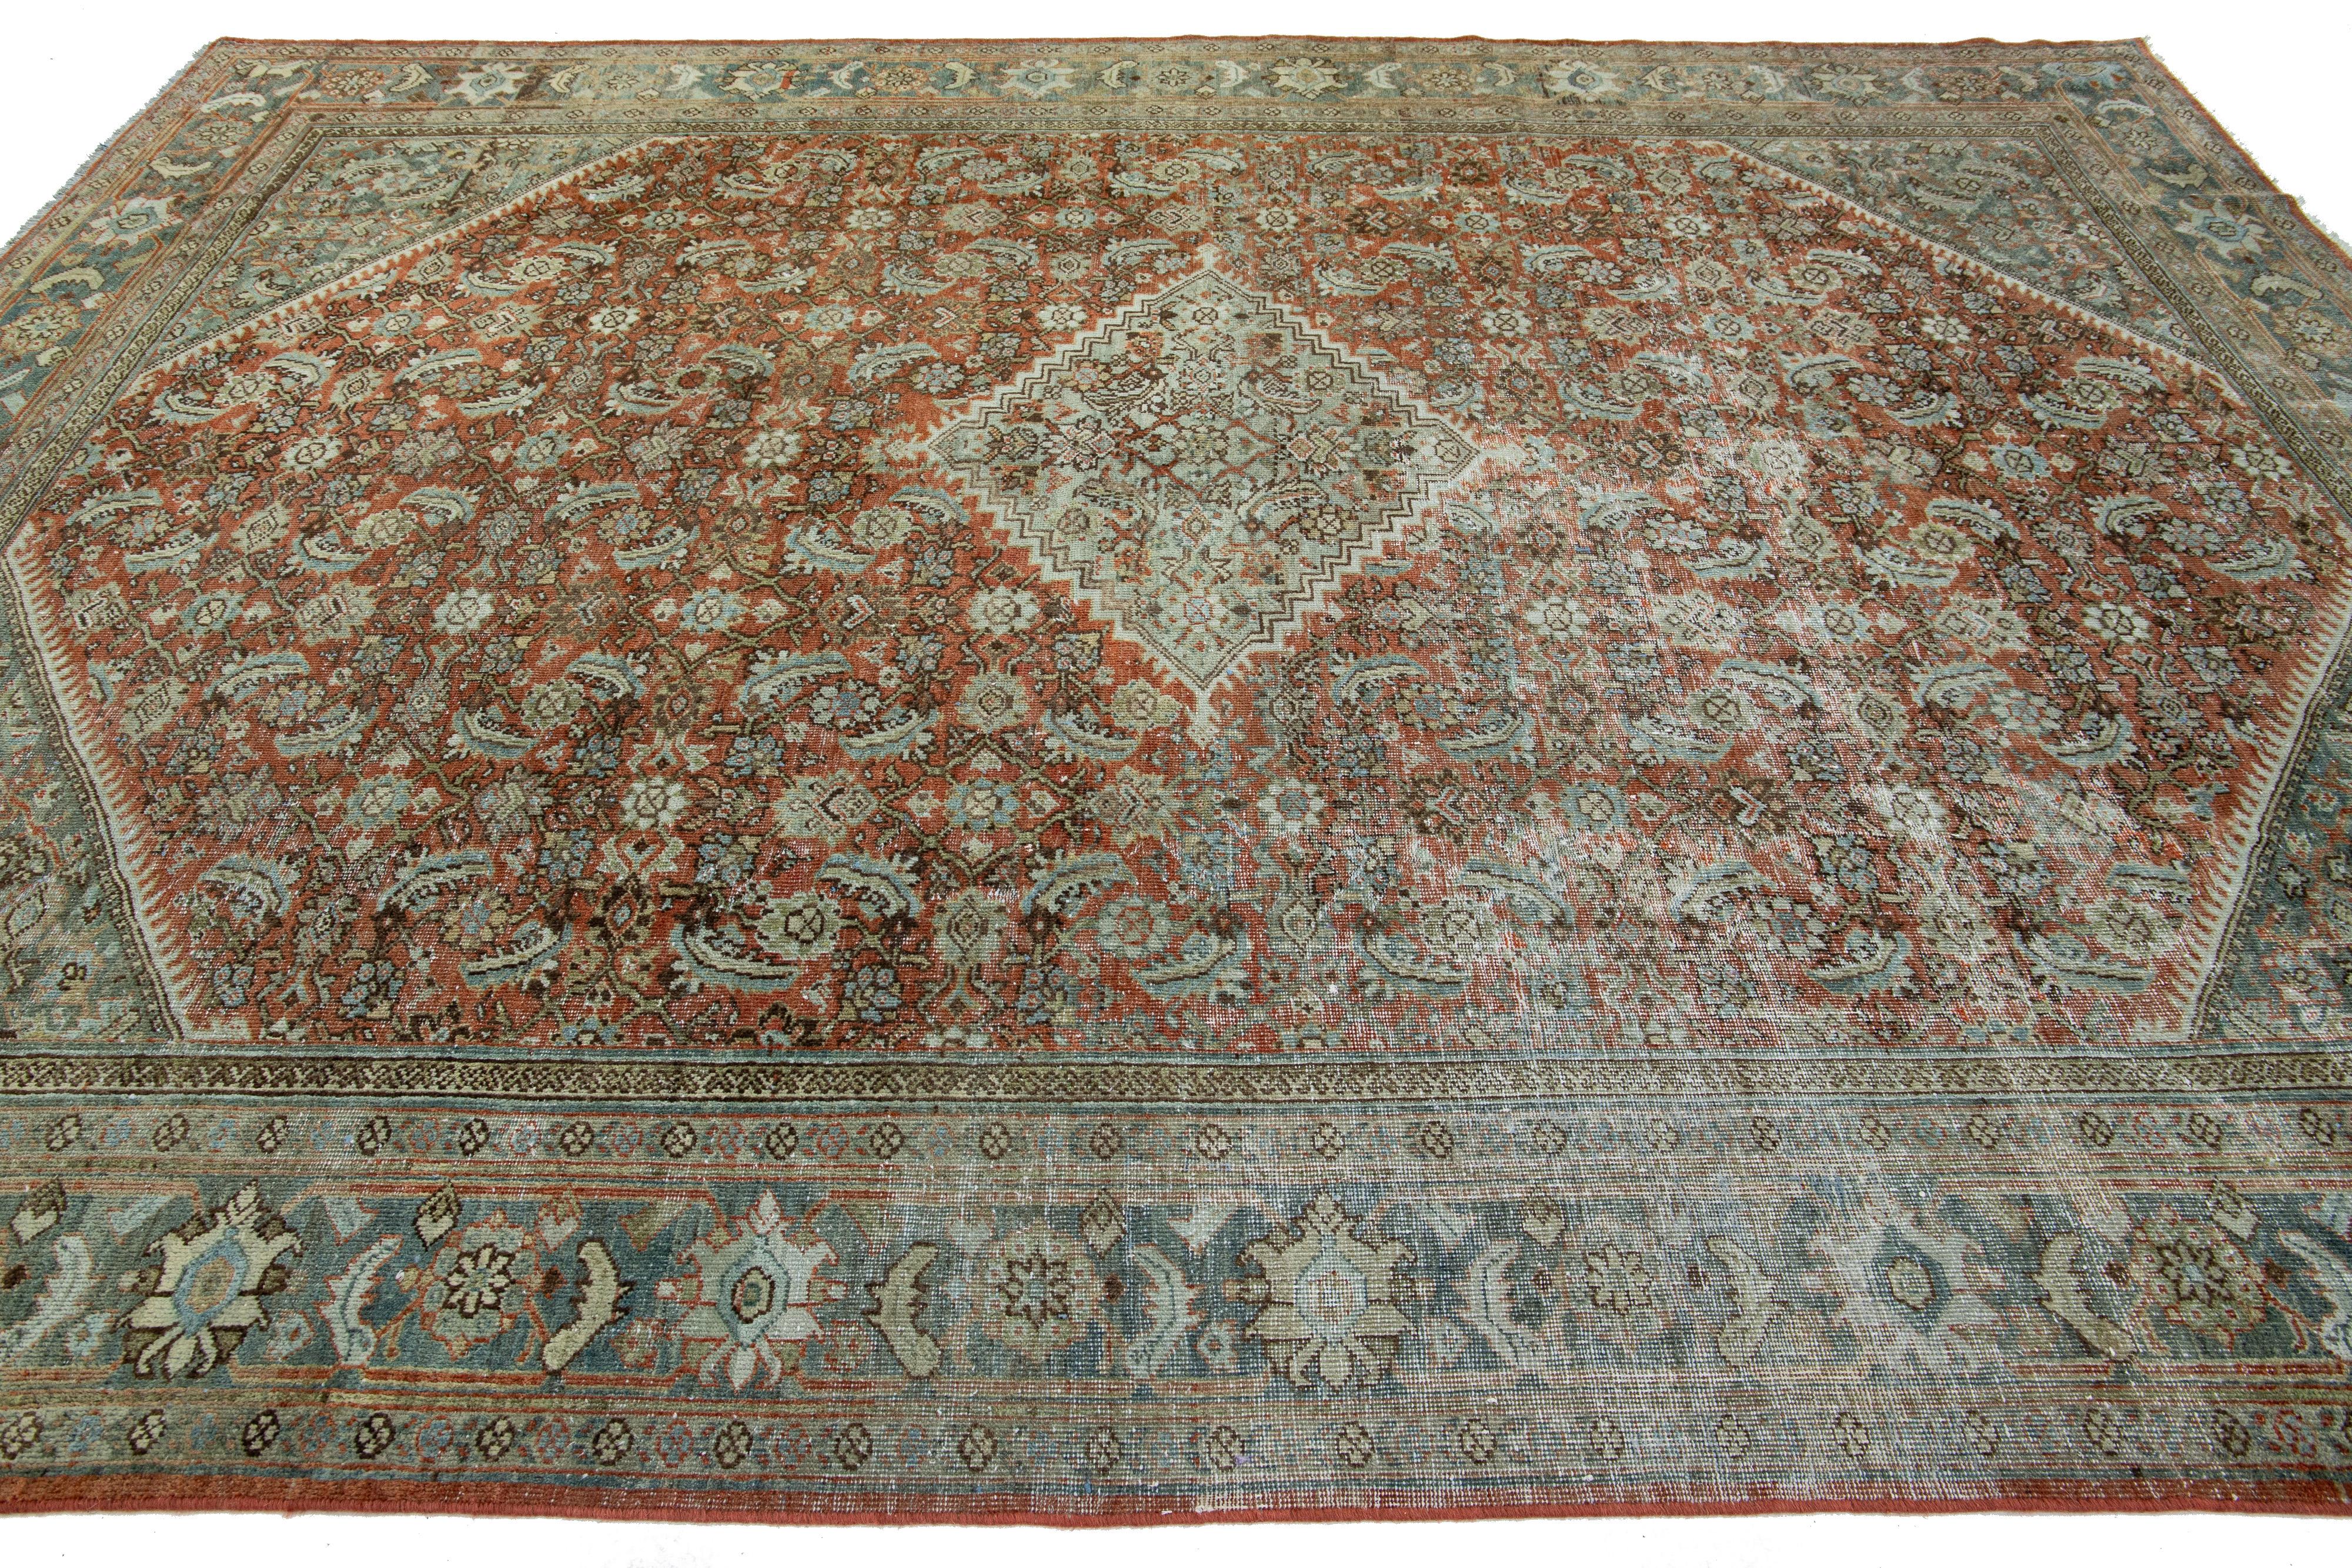 20th Century Red Antique Persian Mahal Wool Rug Allover Motif From The 1900s For Sale